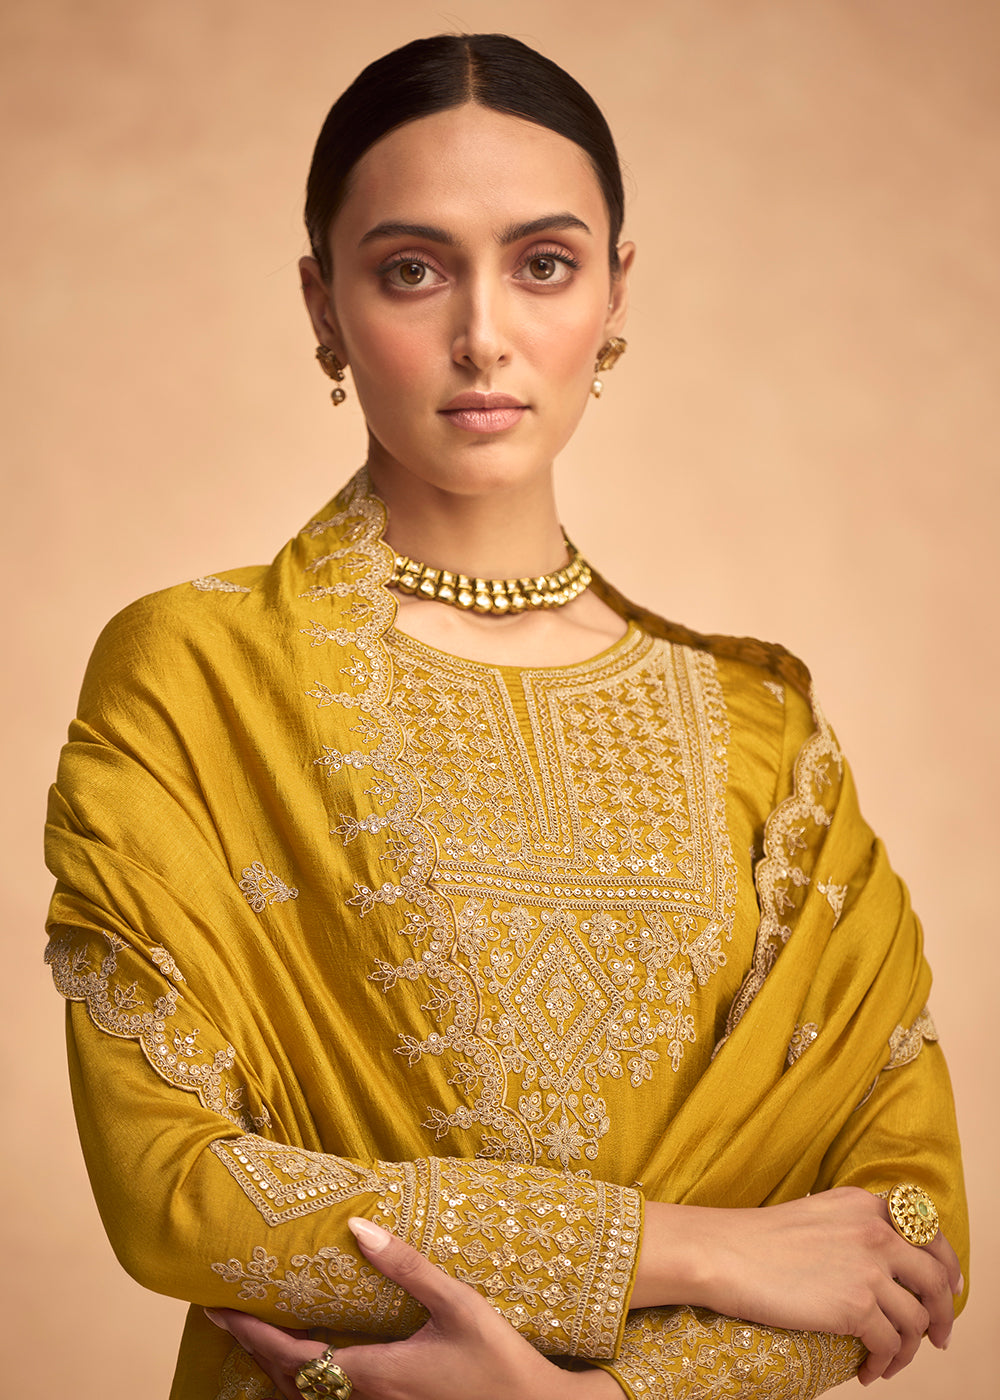 Buy Now Pretty Yellow Premium Silk Embroidered Indian Palazzo Salwar Suit Online in USA, UK, Canada, Germany & Worldwide at Empress Clothing.